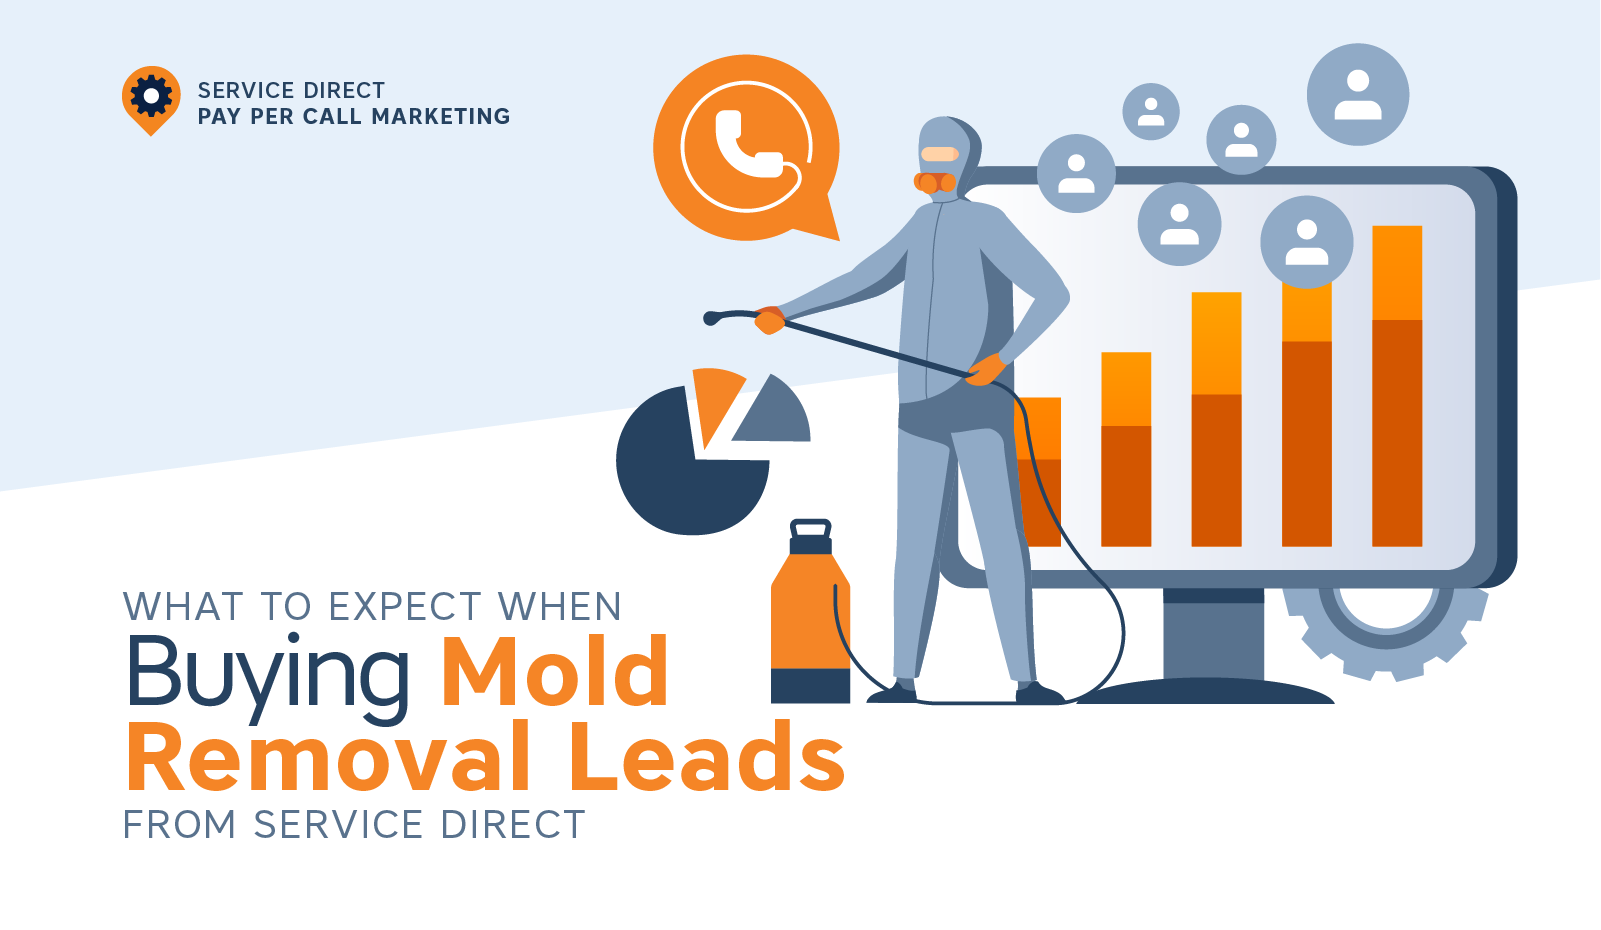 What to Expect When Buying Mold Removal Leads from Service Direct